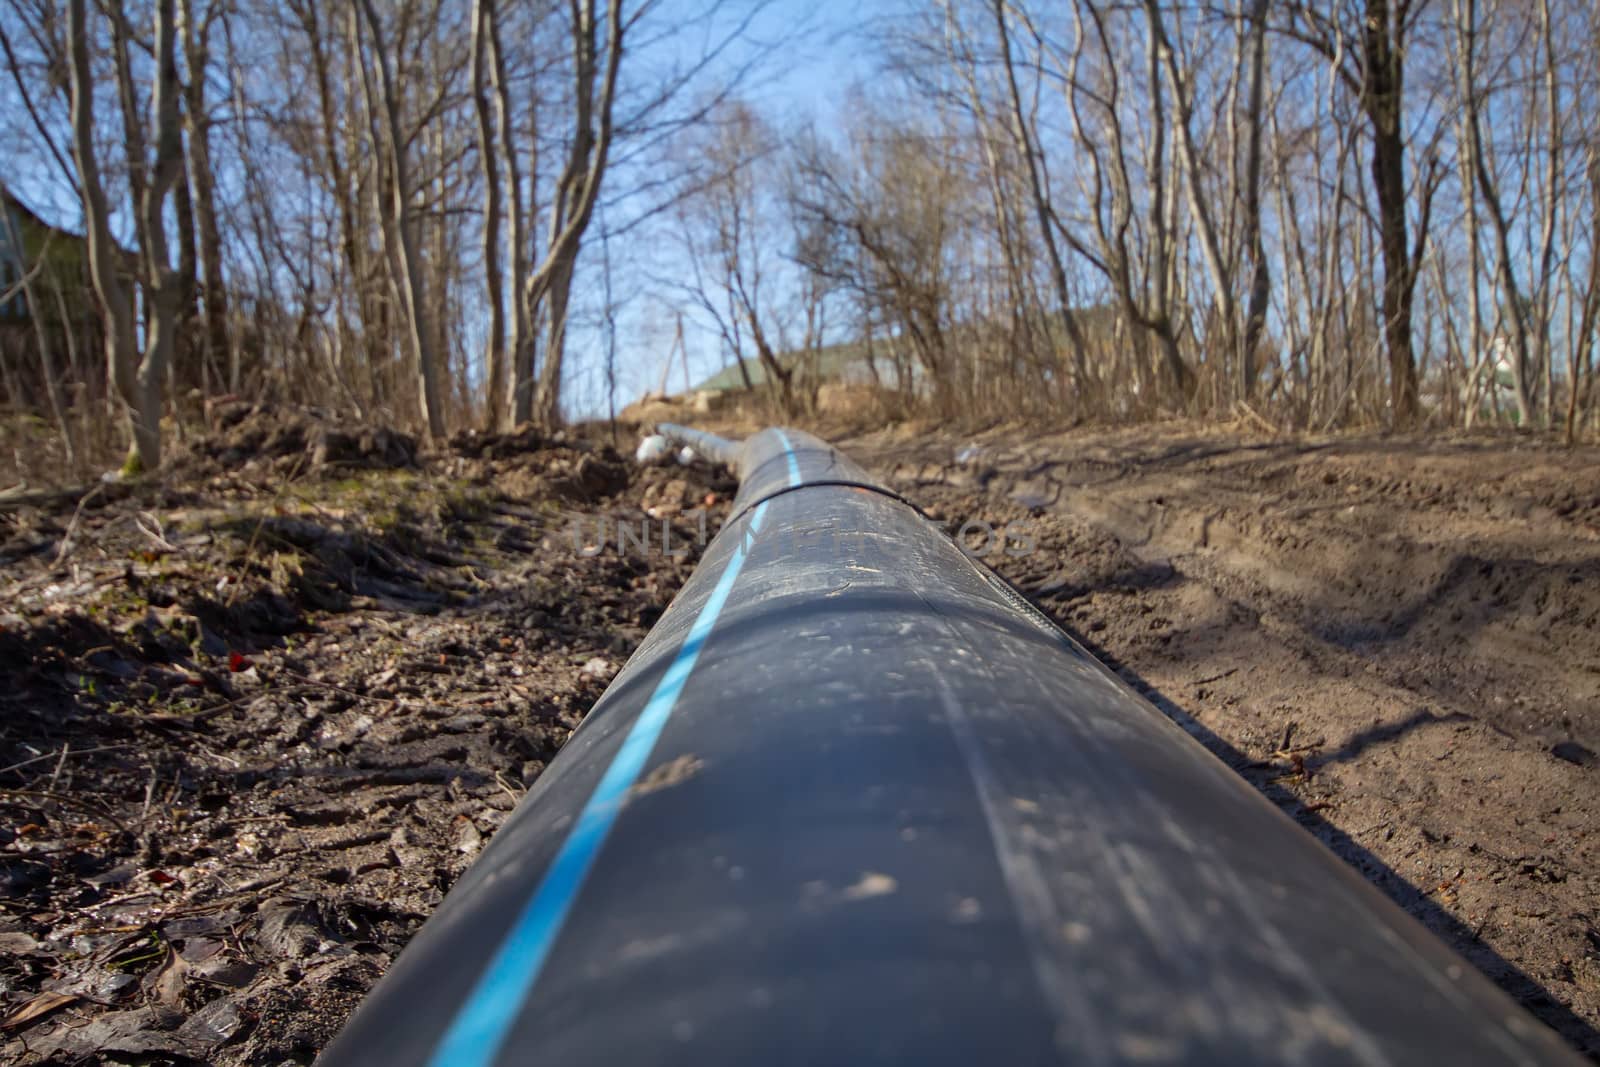 the pipeline among the nature in the country